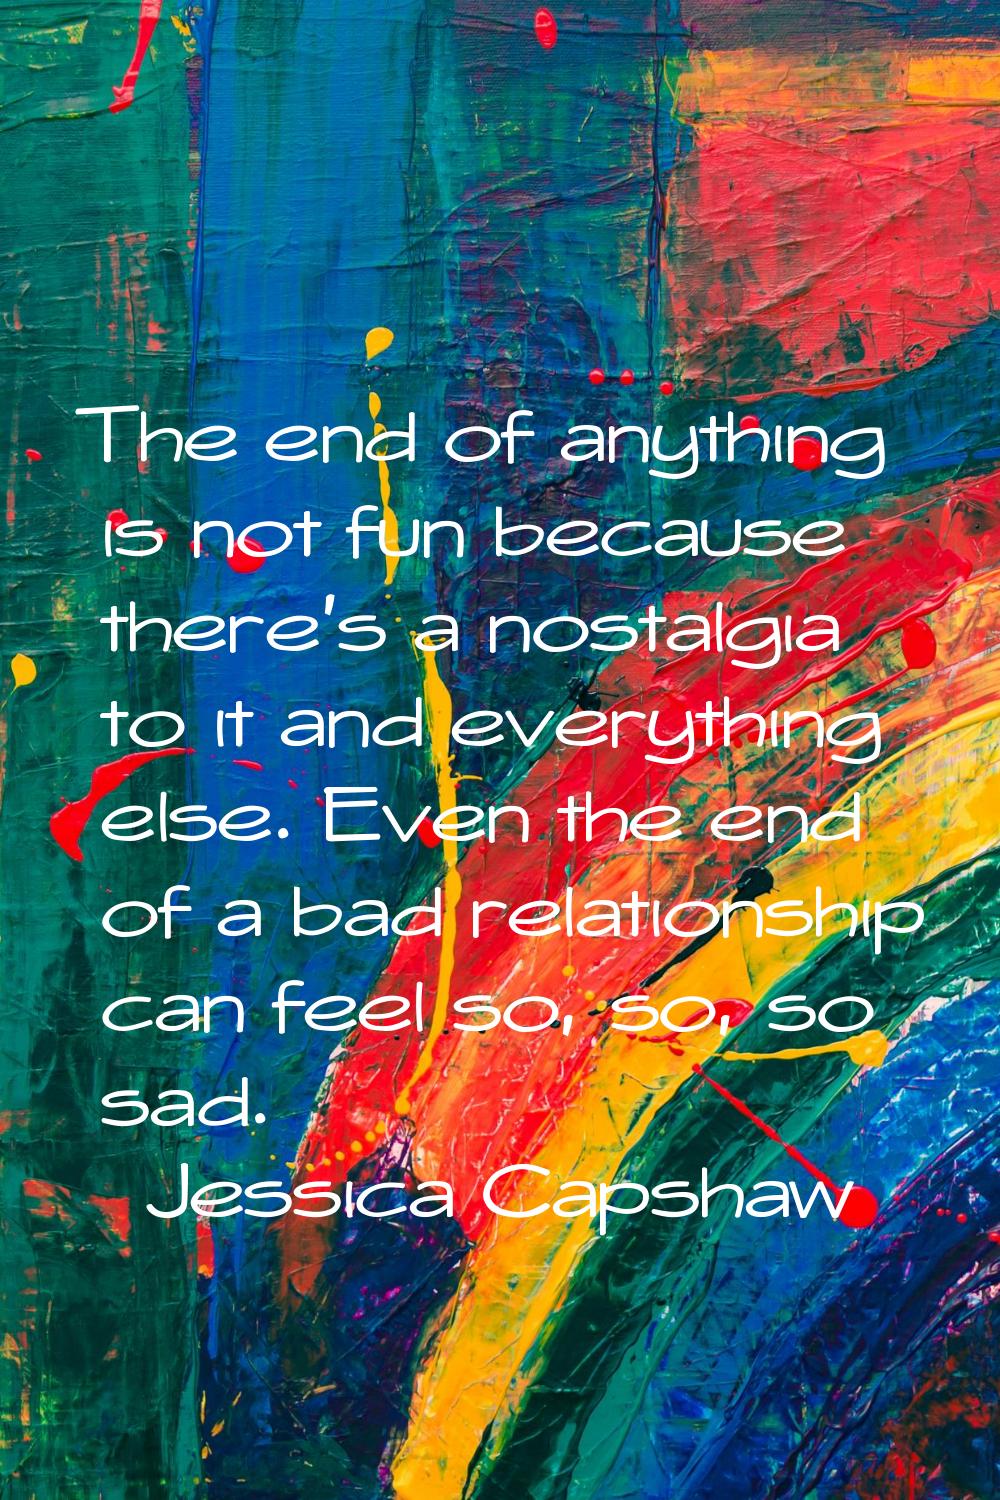 The end of anything is not fun because there's a nostalgia to it and everything else. Even the end 